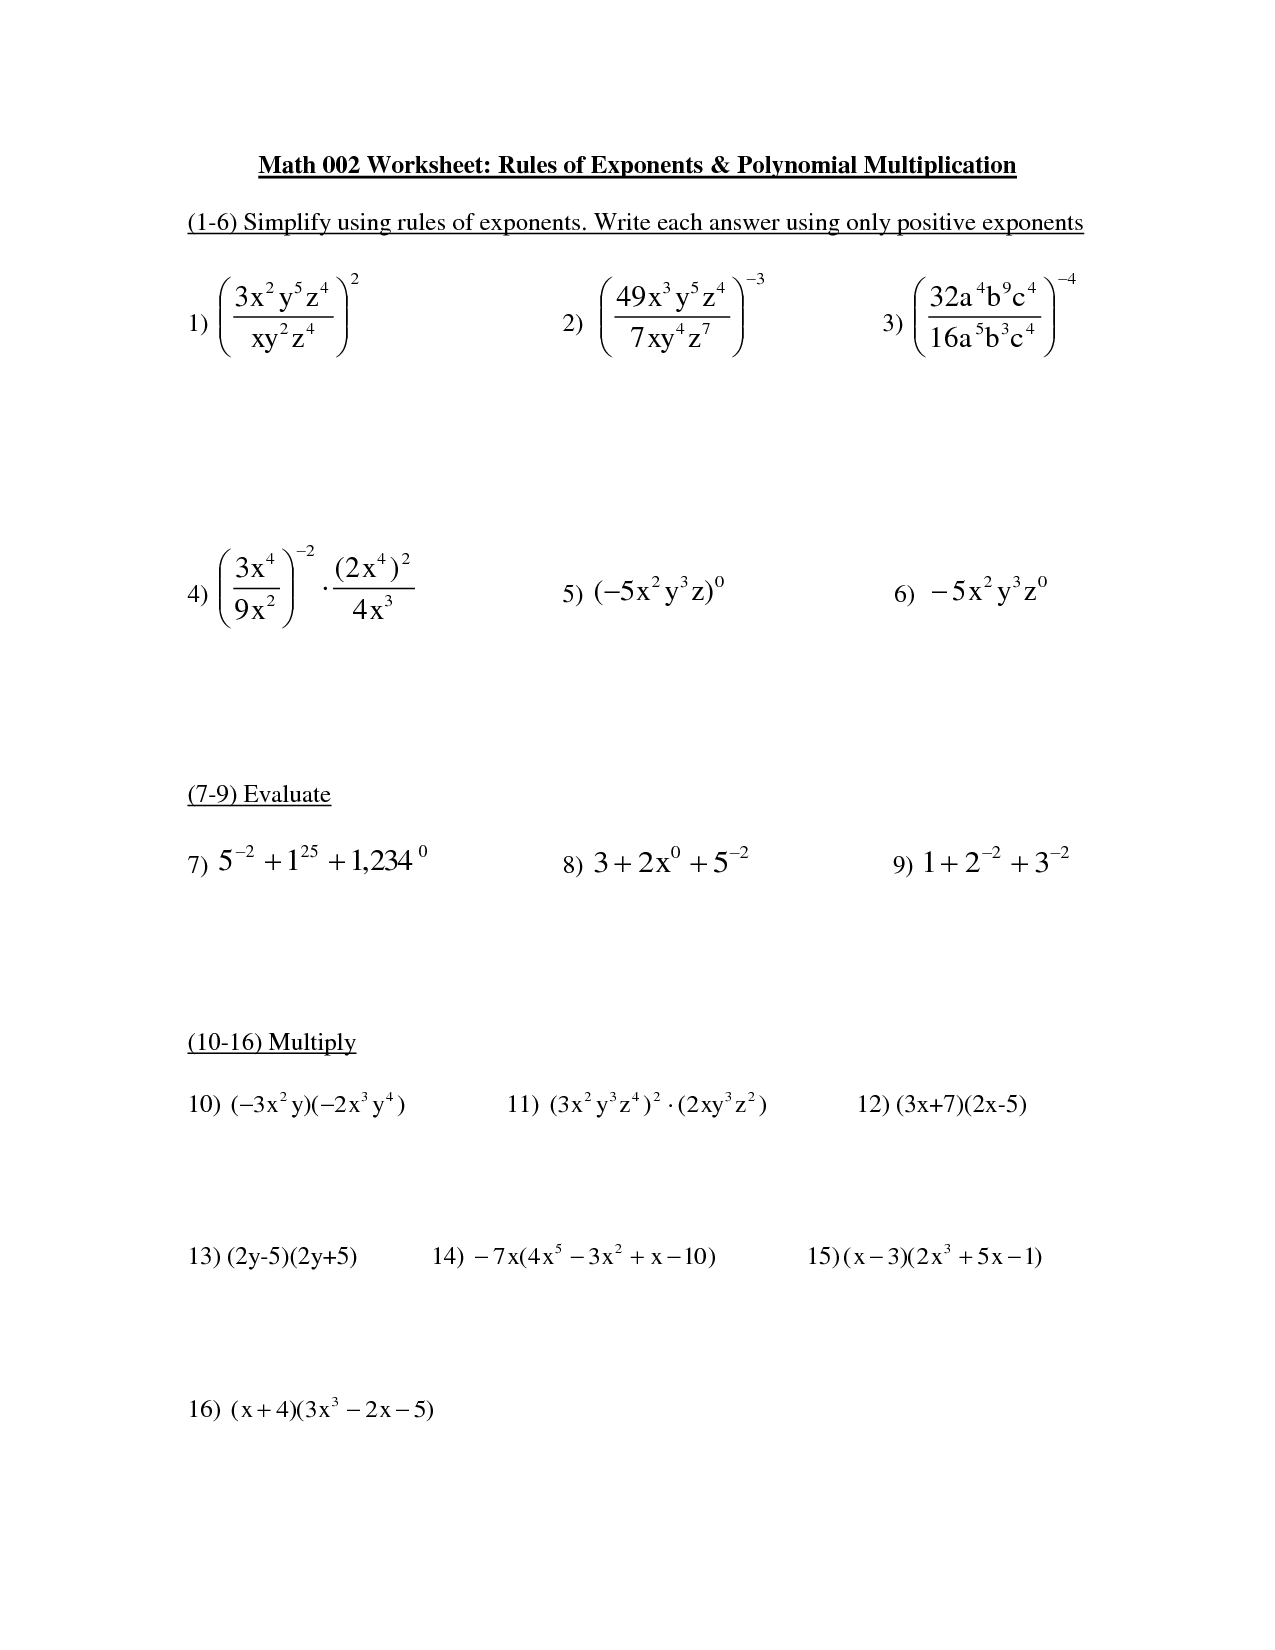 16-best-images-of-multiplication-math-worksheets-exponents